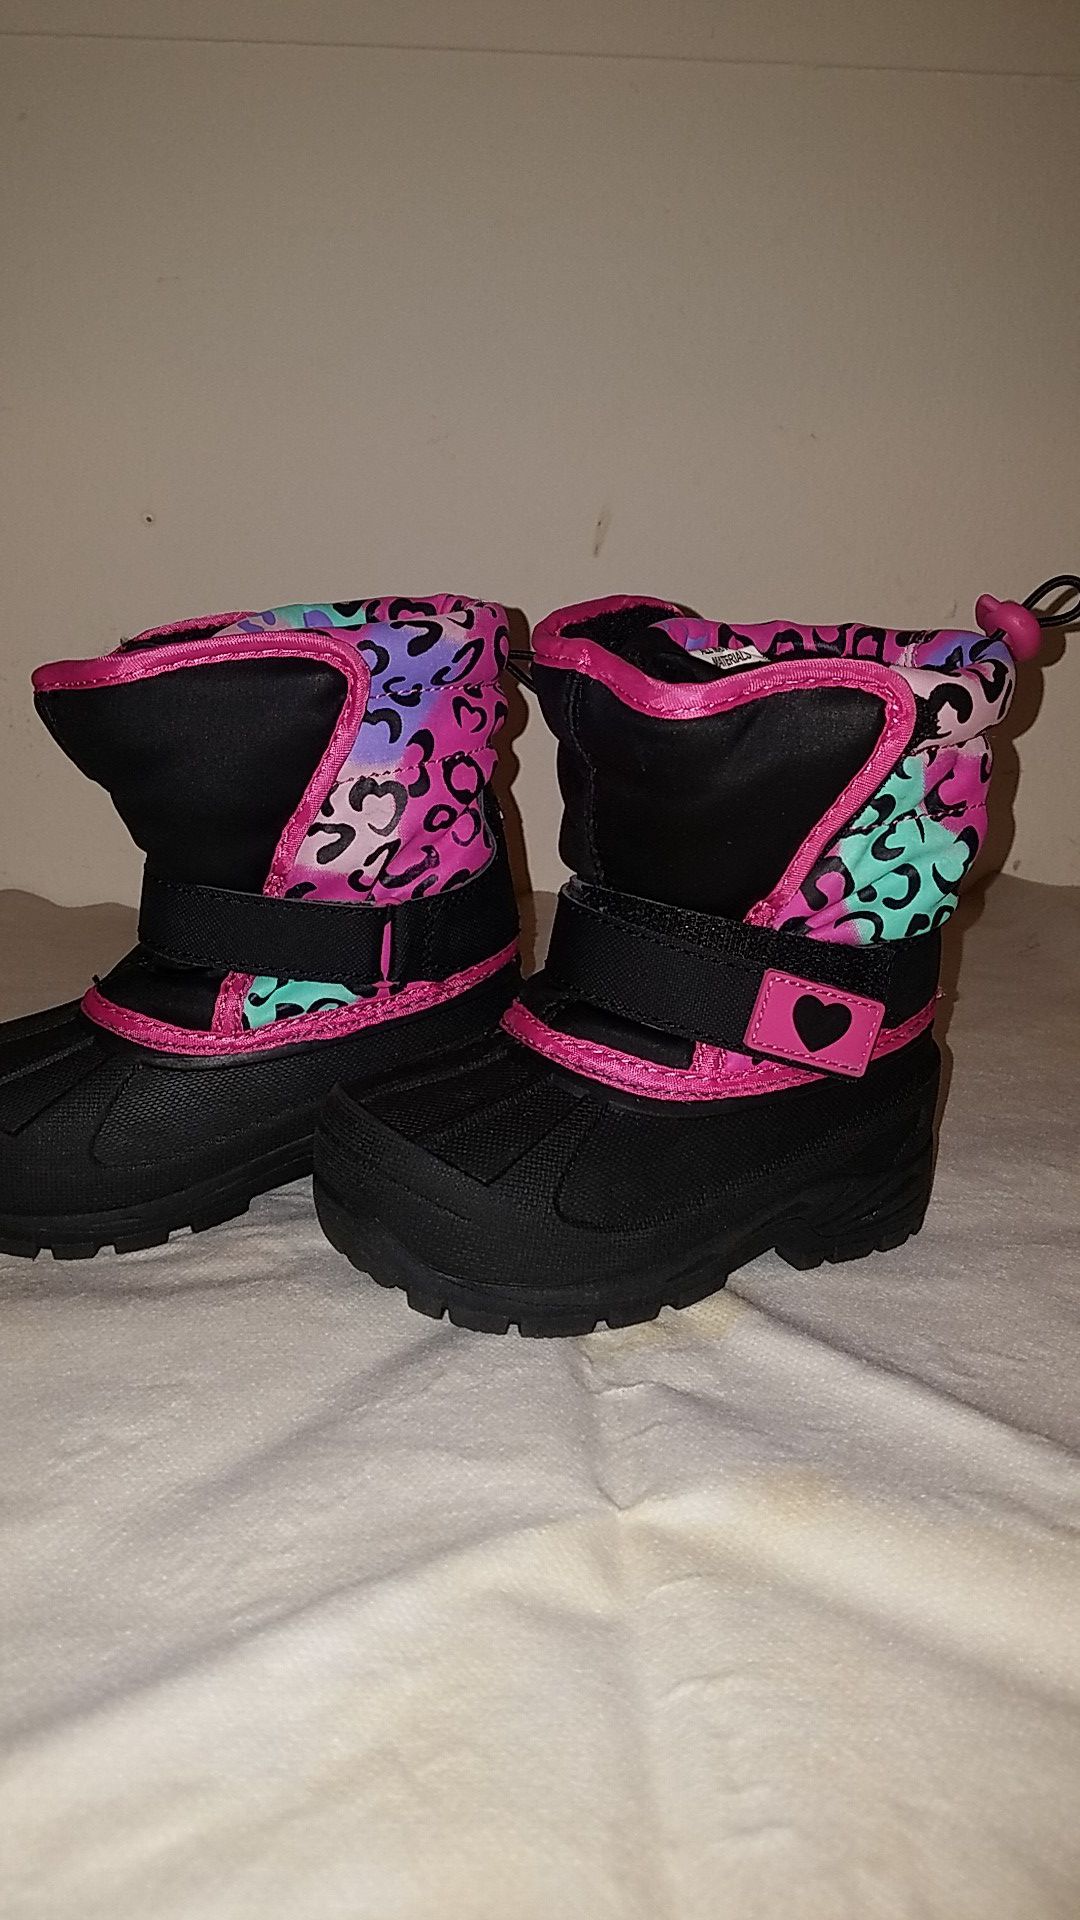 NEW Snow boots Toddler size 7